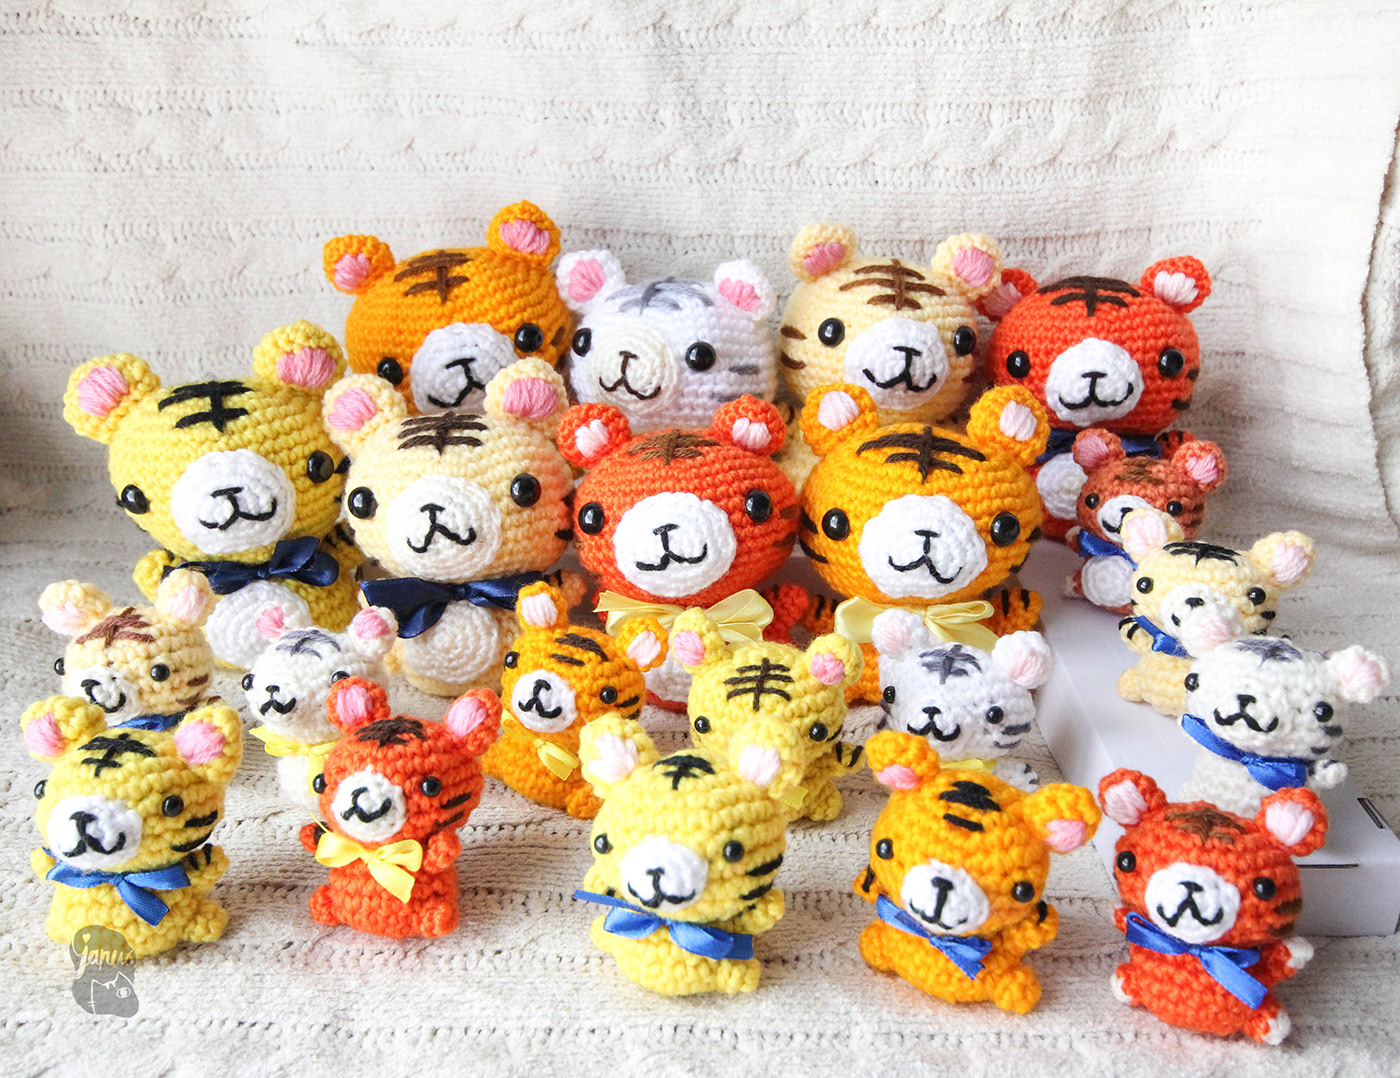 crochet decorations wedding tigers zoo toys yarn januslee auckland Crafter